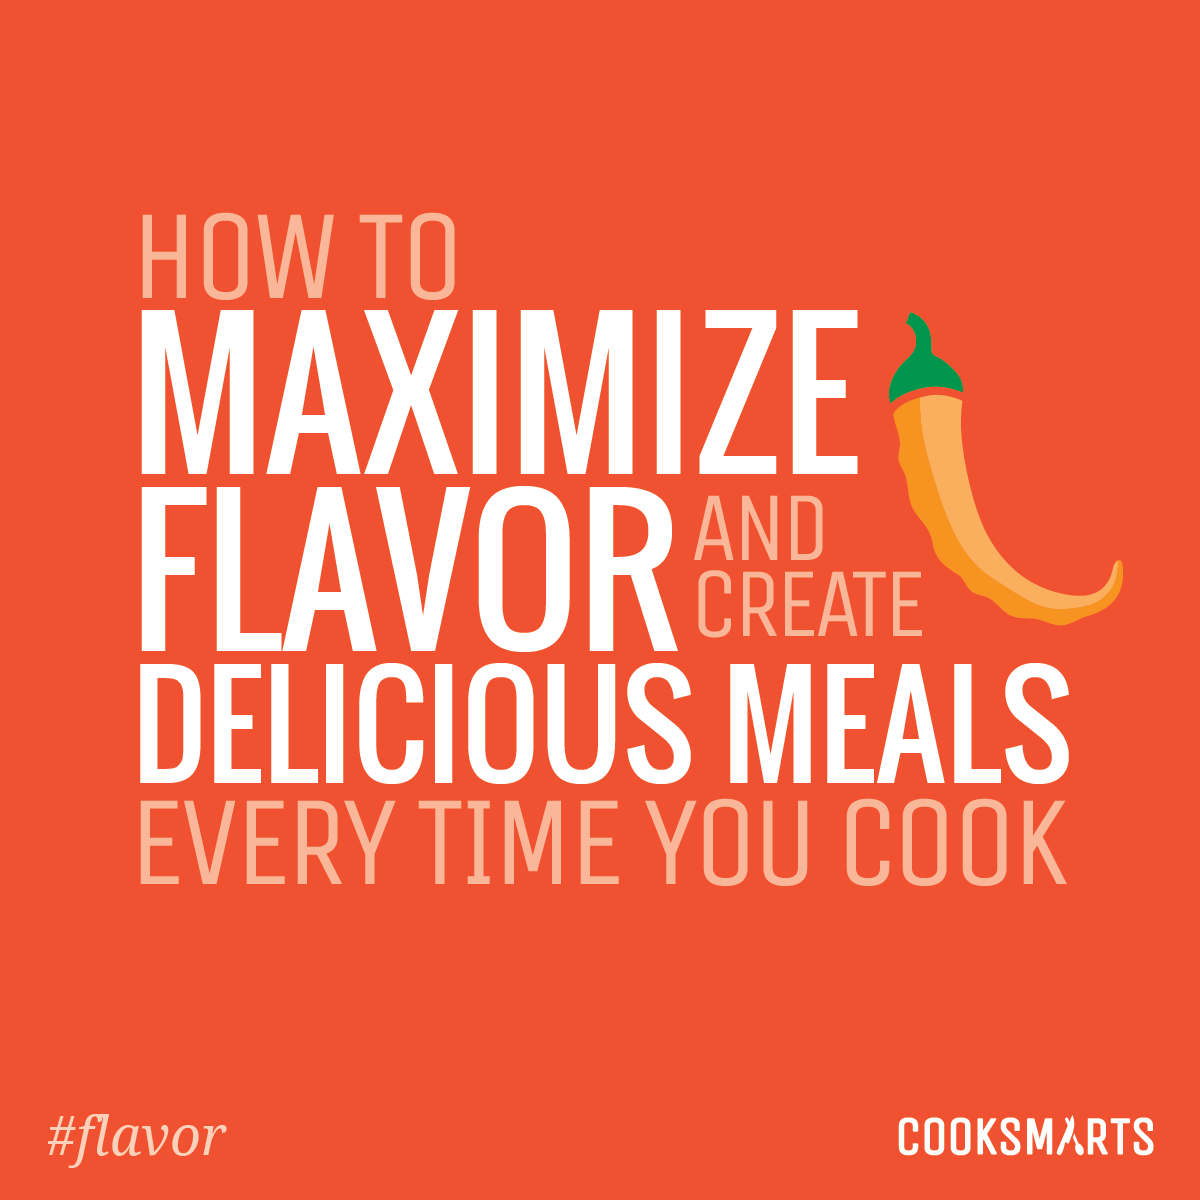 How to maximize flavor and create delicious meals every time you cook by @cooksmarts